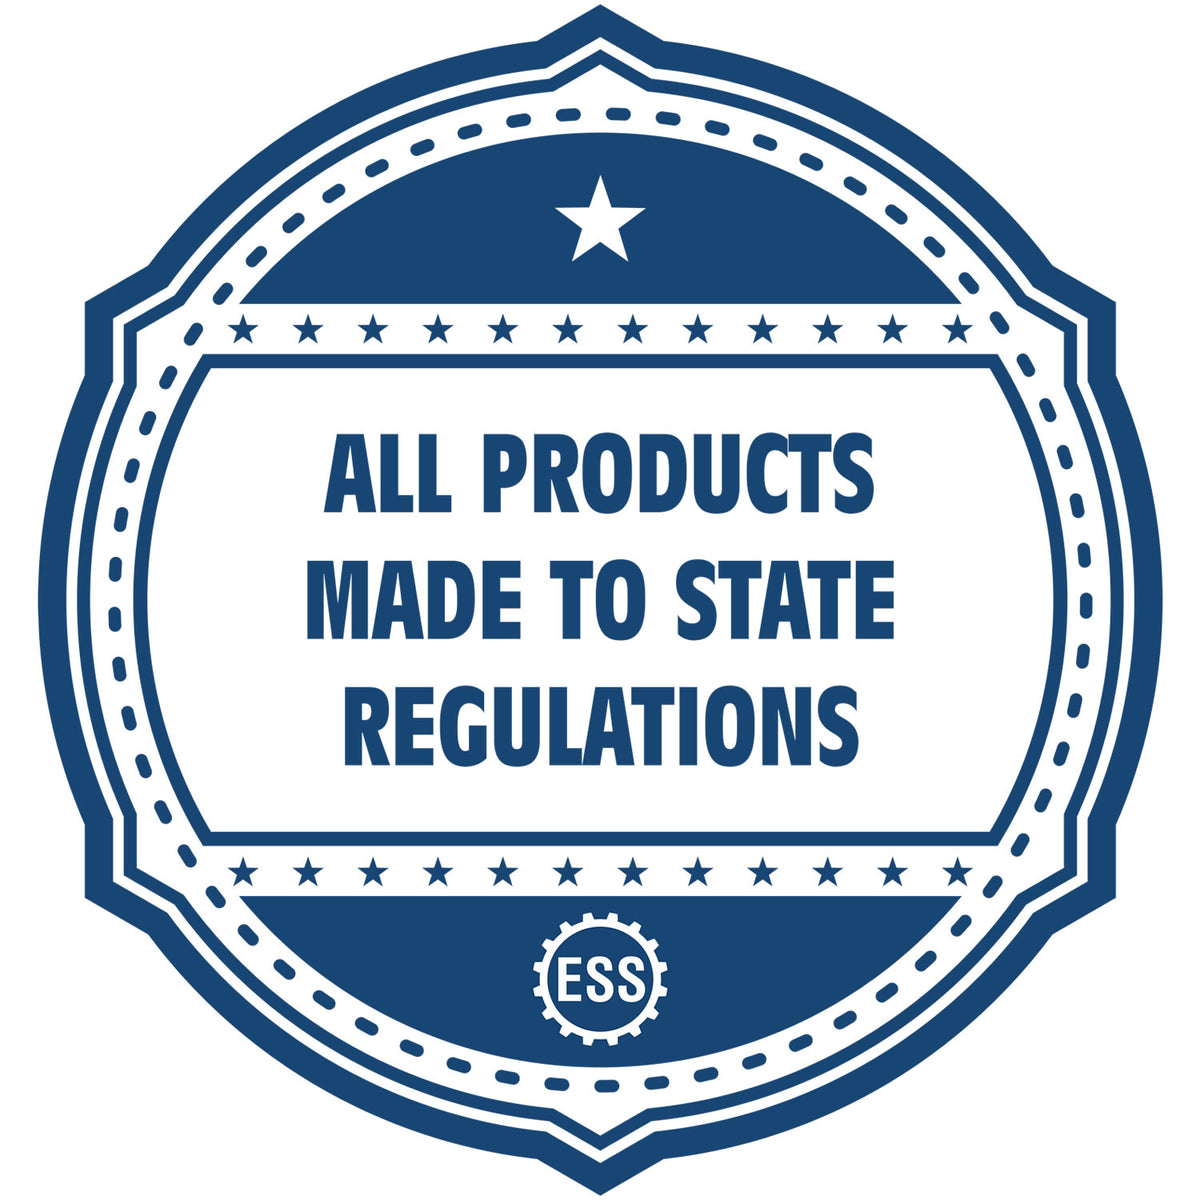 A blue icon or badge for the Heavy Duty Cast Iron Montana Geologist Seal Embosser showing that this product is made in compliance with state regulations.